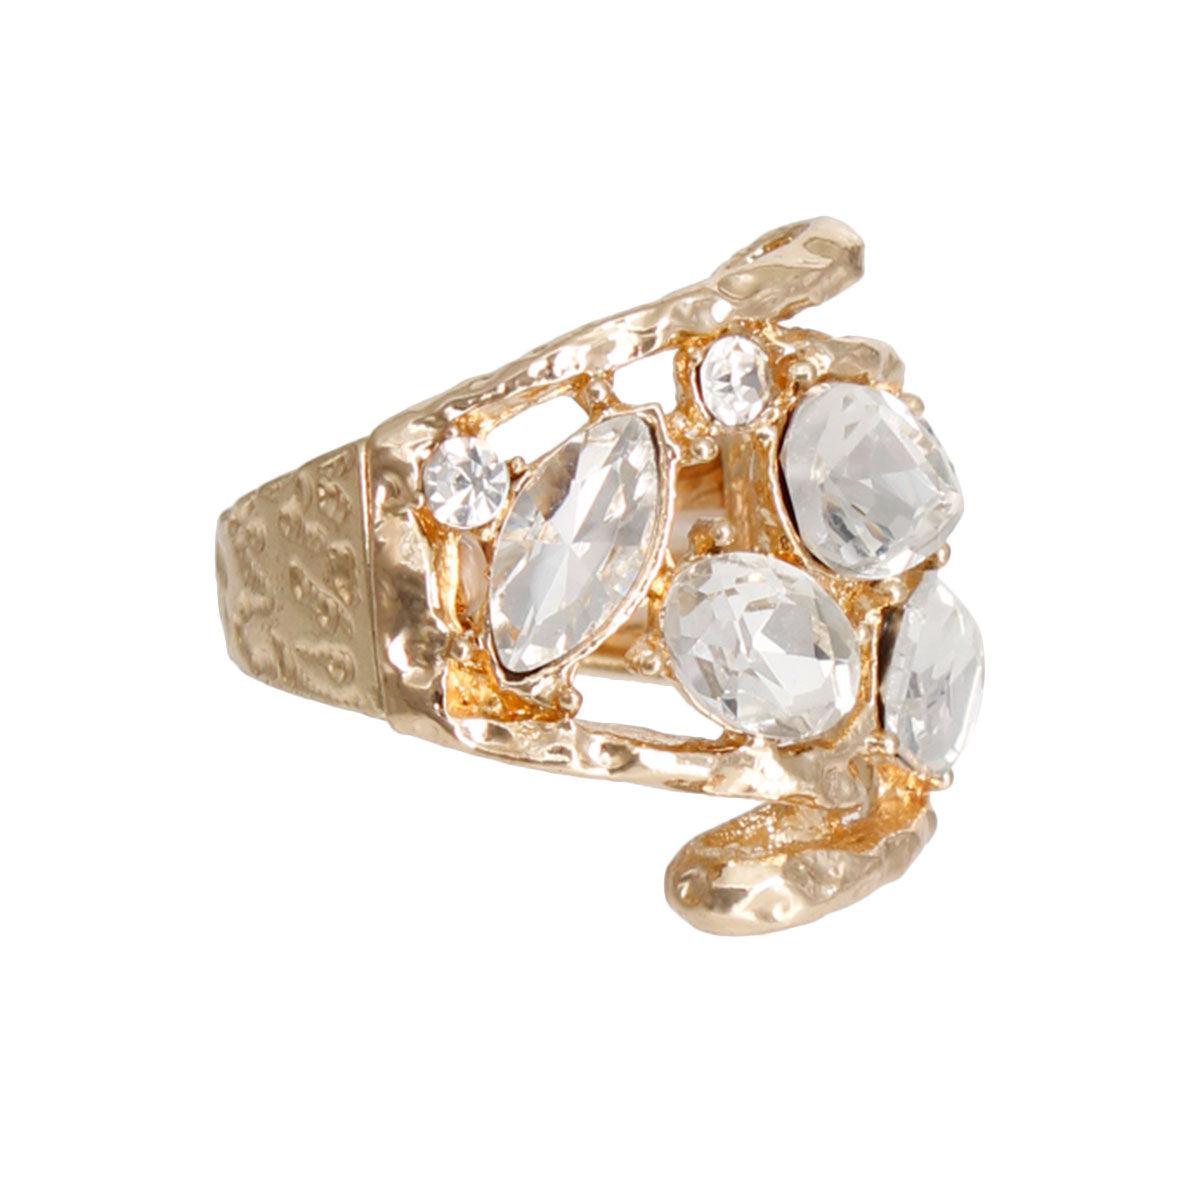 Stunning Curved Cocktail Ring - Gold Finish Clear Crystal